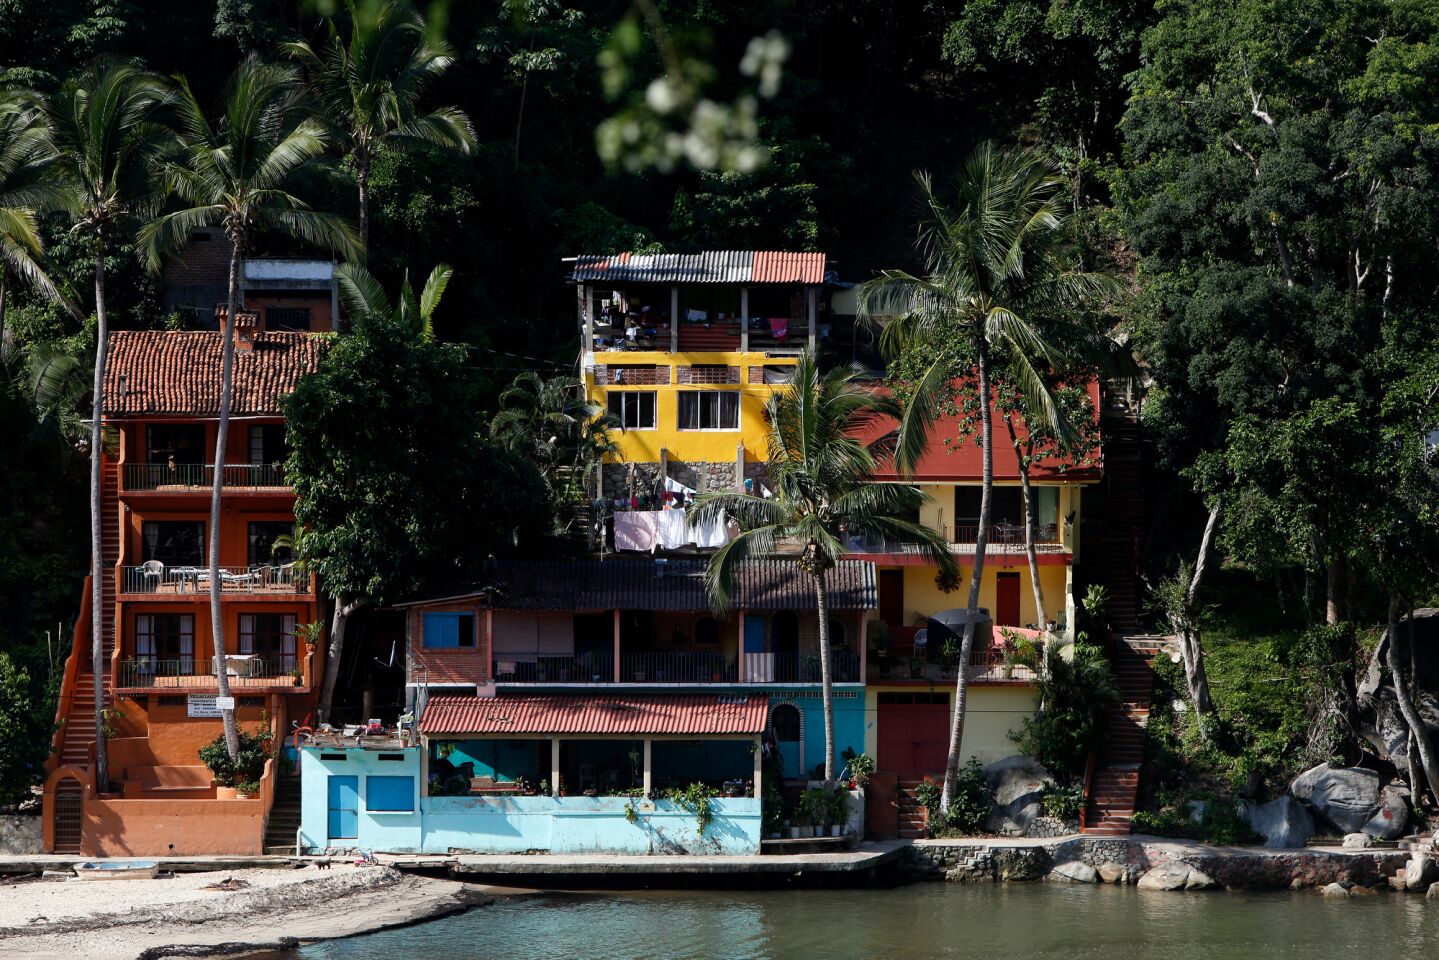 PUERTO VALLARTA, MEX-SEPTEMBER 2, 2019: A path takes you along the homes in Boca de Tomatlan to Colomitos Cove on September 2, 2019 in Puerto Vallarta, Mexico. (Photo By Dania Maxwell / Los Angeles Times)